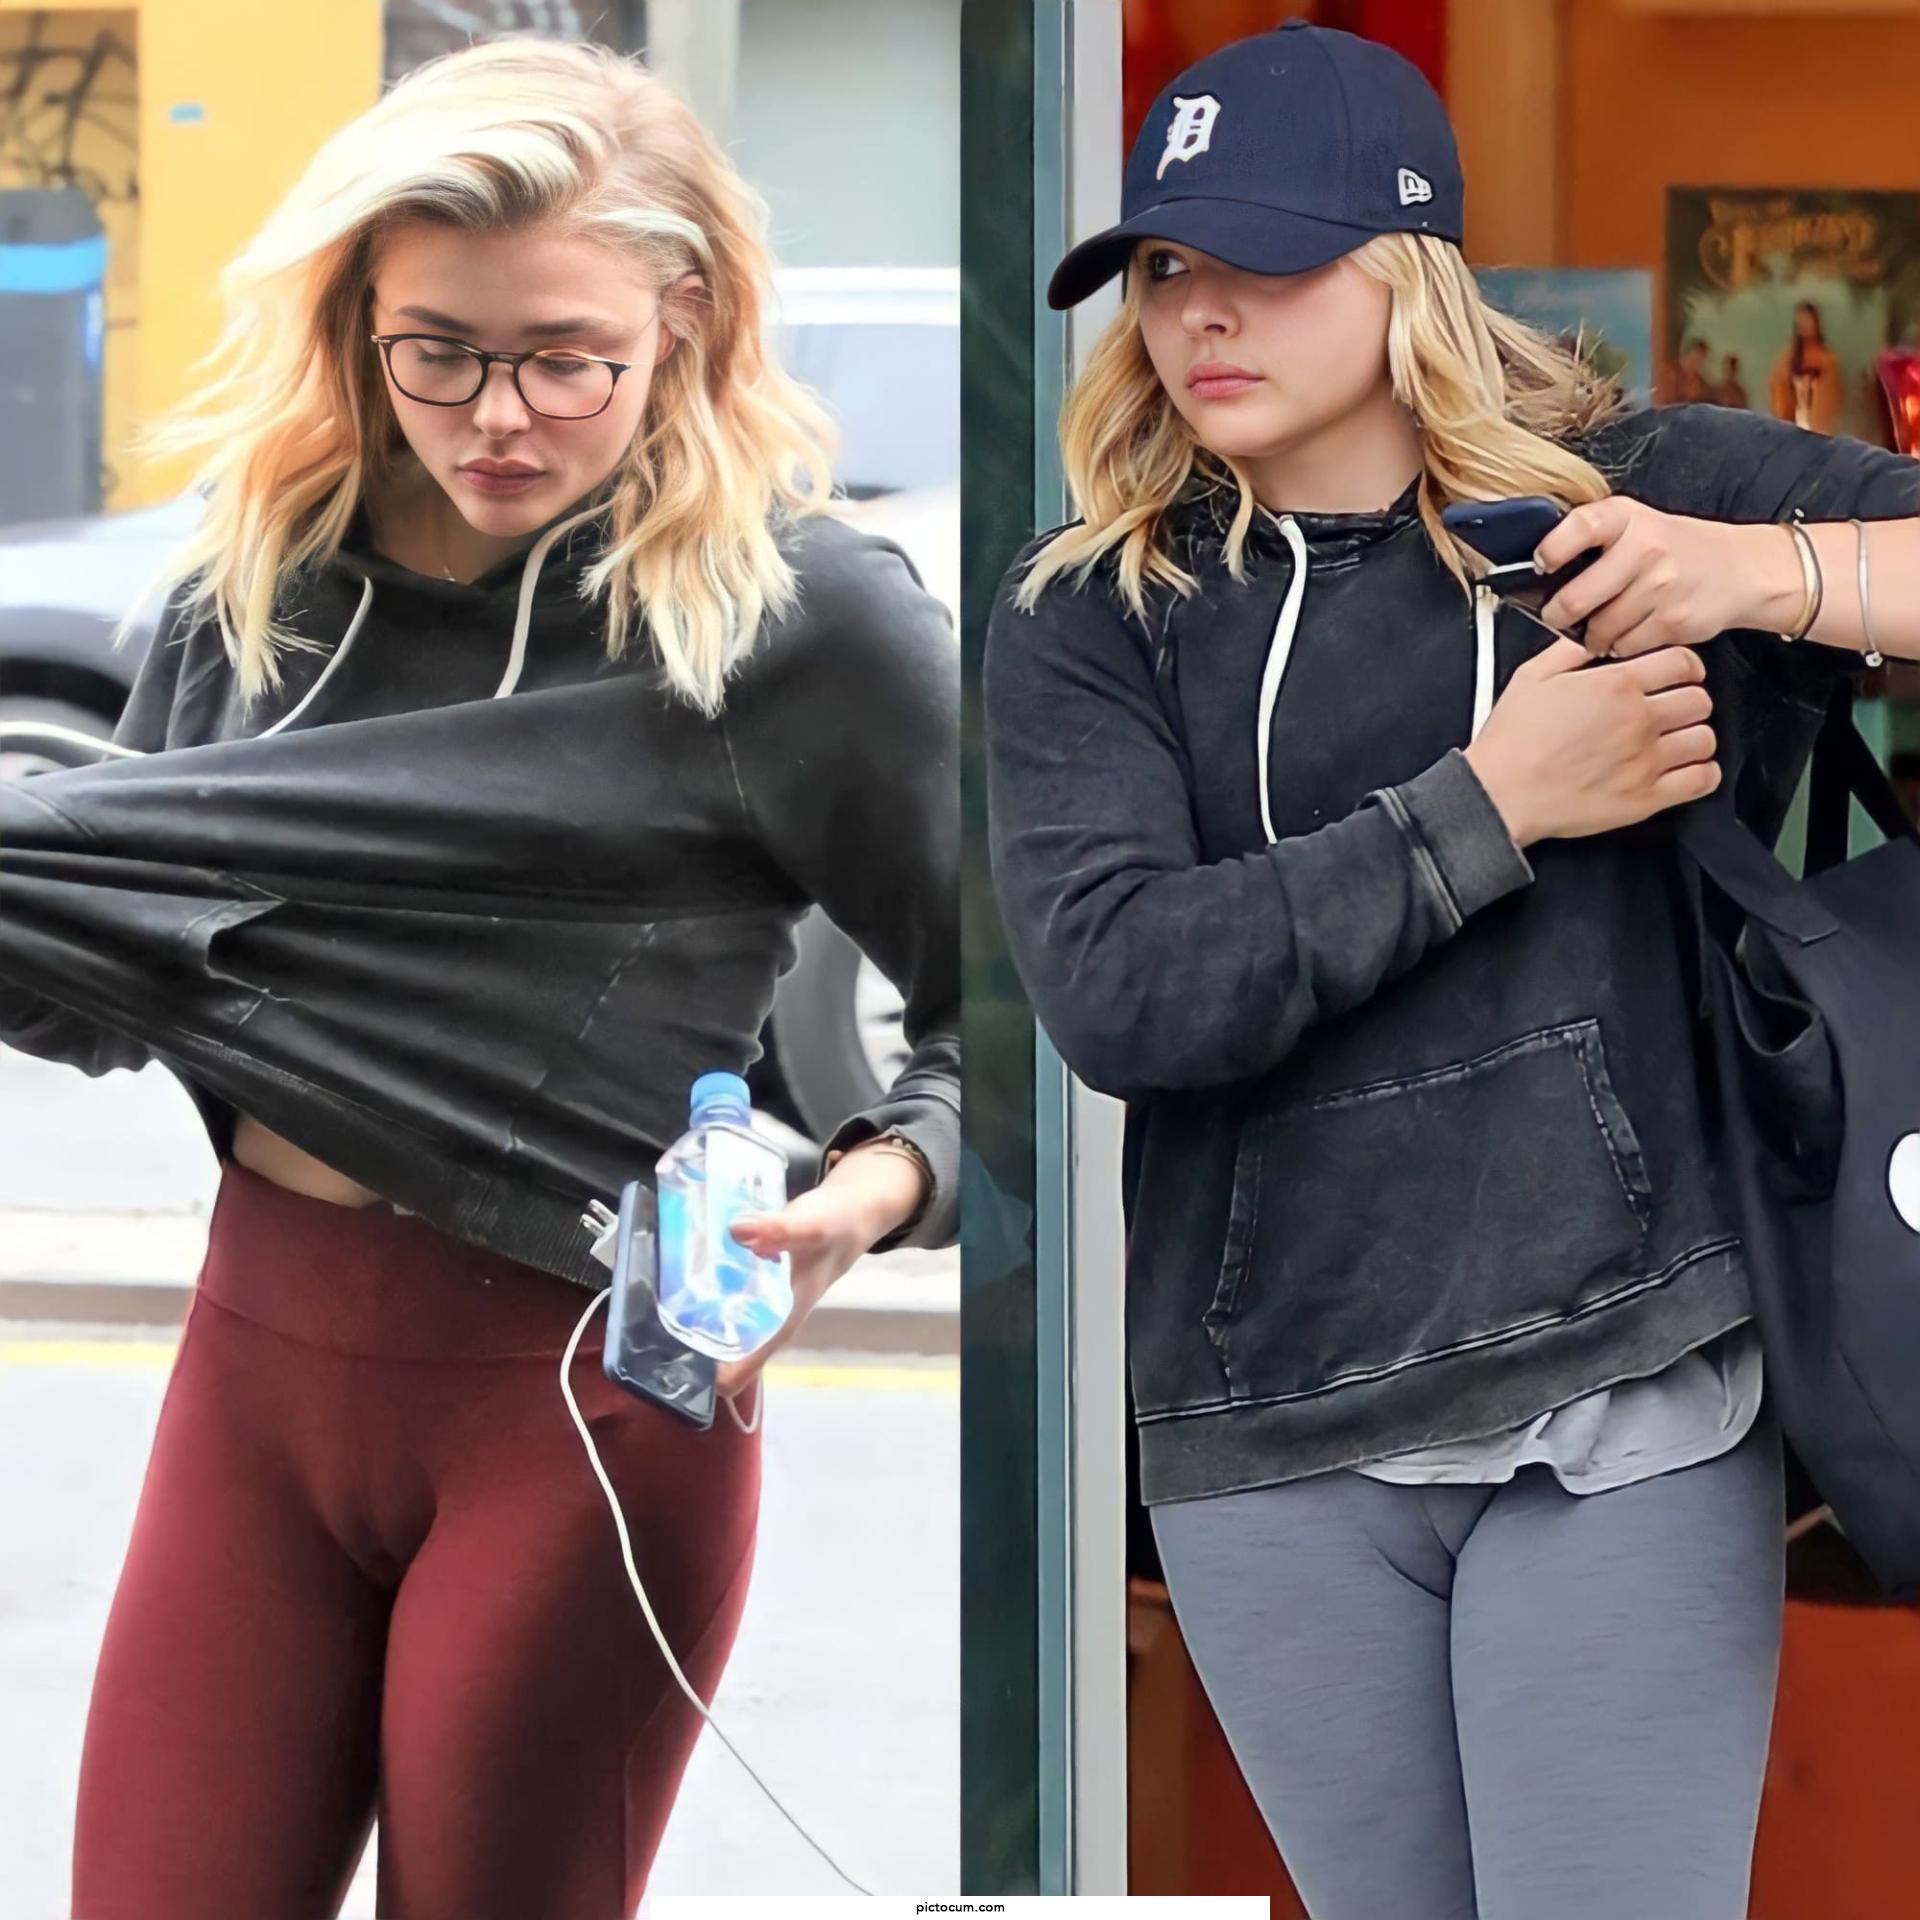 What you doing with Chloe Grace Moretz's camel toe